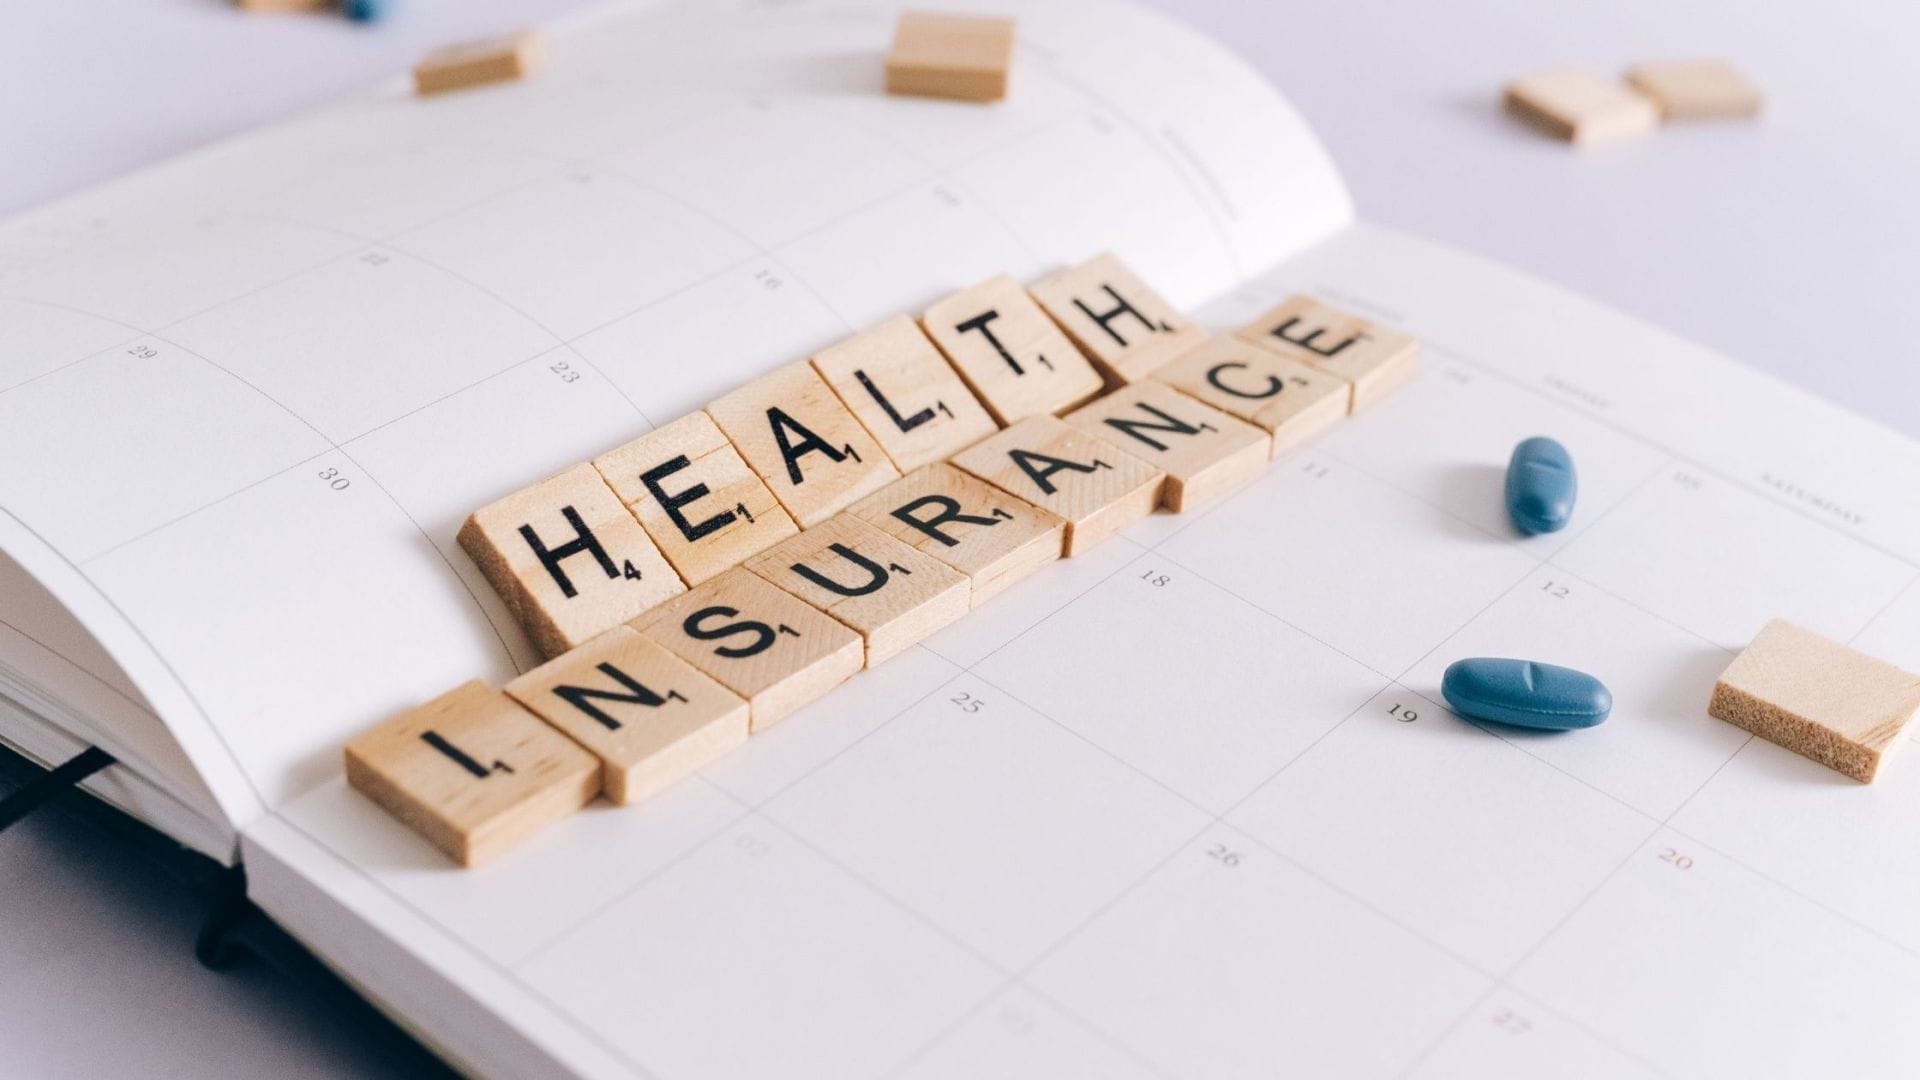 Wooden tiles spell out 'HEALTH INSURANCE' on an open planner, with two blue pills nearby, indicating the role of health insurance in planning and managing the expenses related to skin cancer treatment.